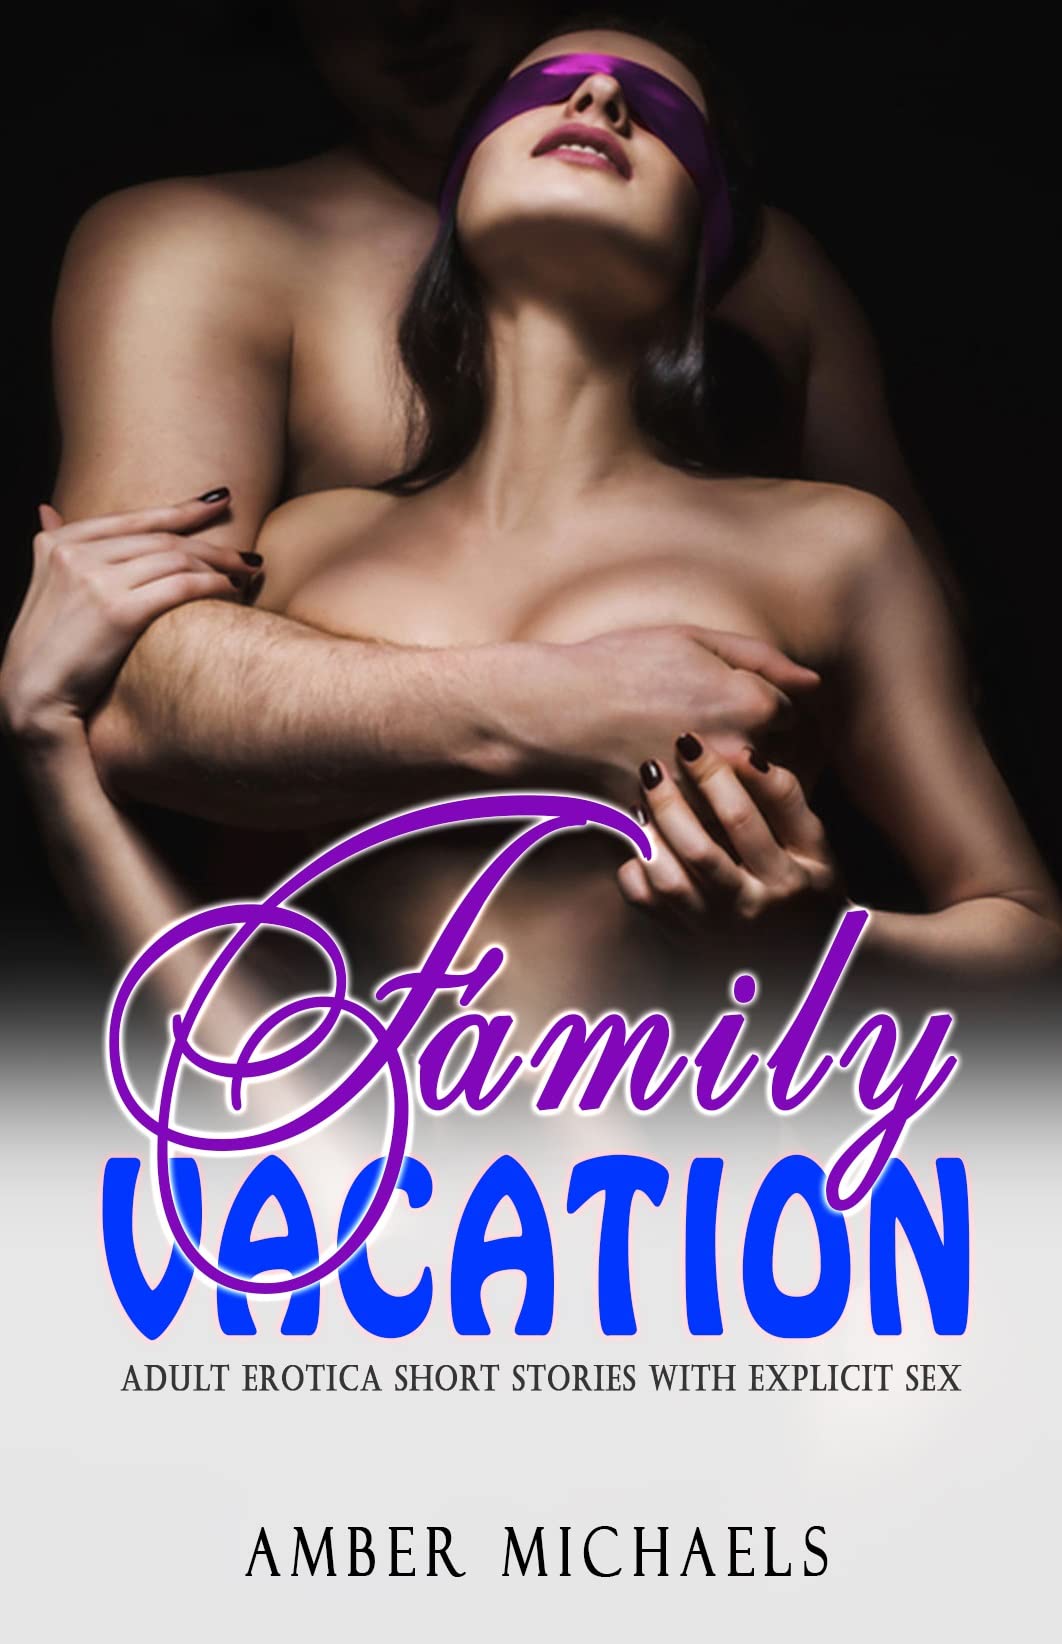 blake osborn recommends nude family vacation stories pic